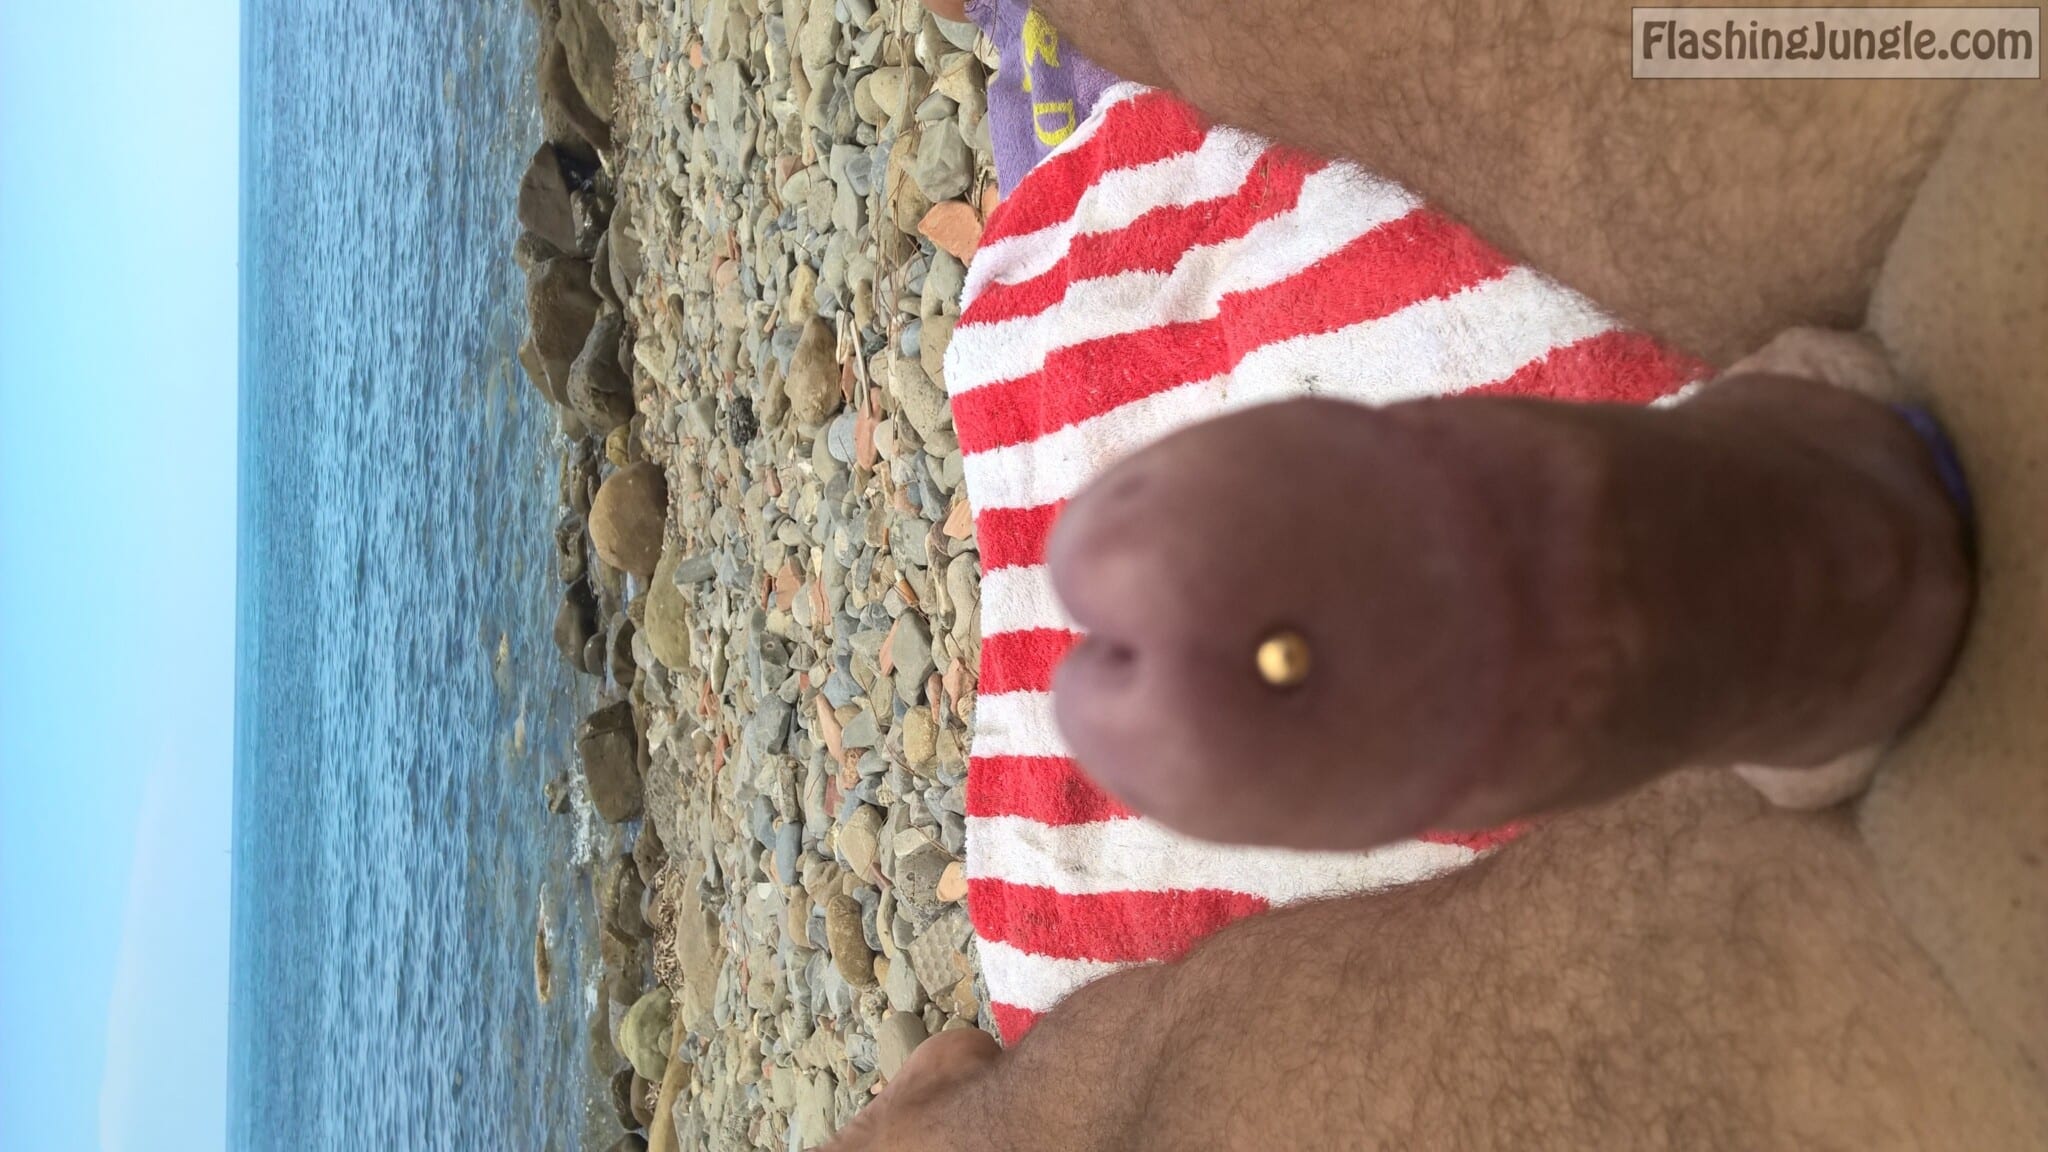 public flash gif - Amateur dick flash on beach piercing show off Pure amateur naturist and exhibitionist enjoying in touching his small cock in public and showing off his brand new piercing. Public beach dick flash amateur pics submitted by our visitor. nude beach... - Dick Flash Pics